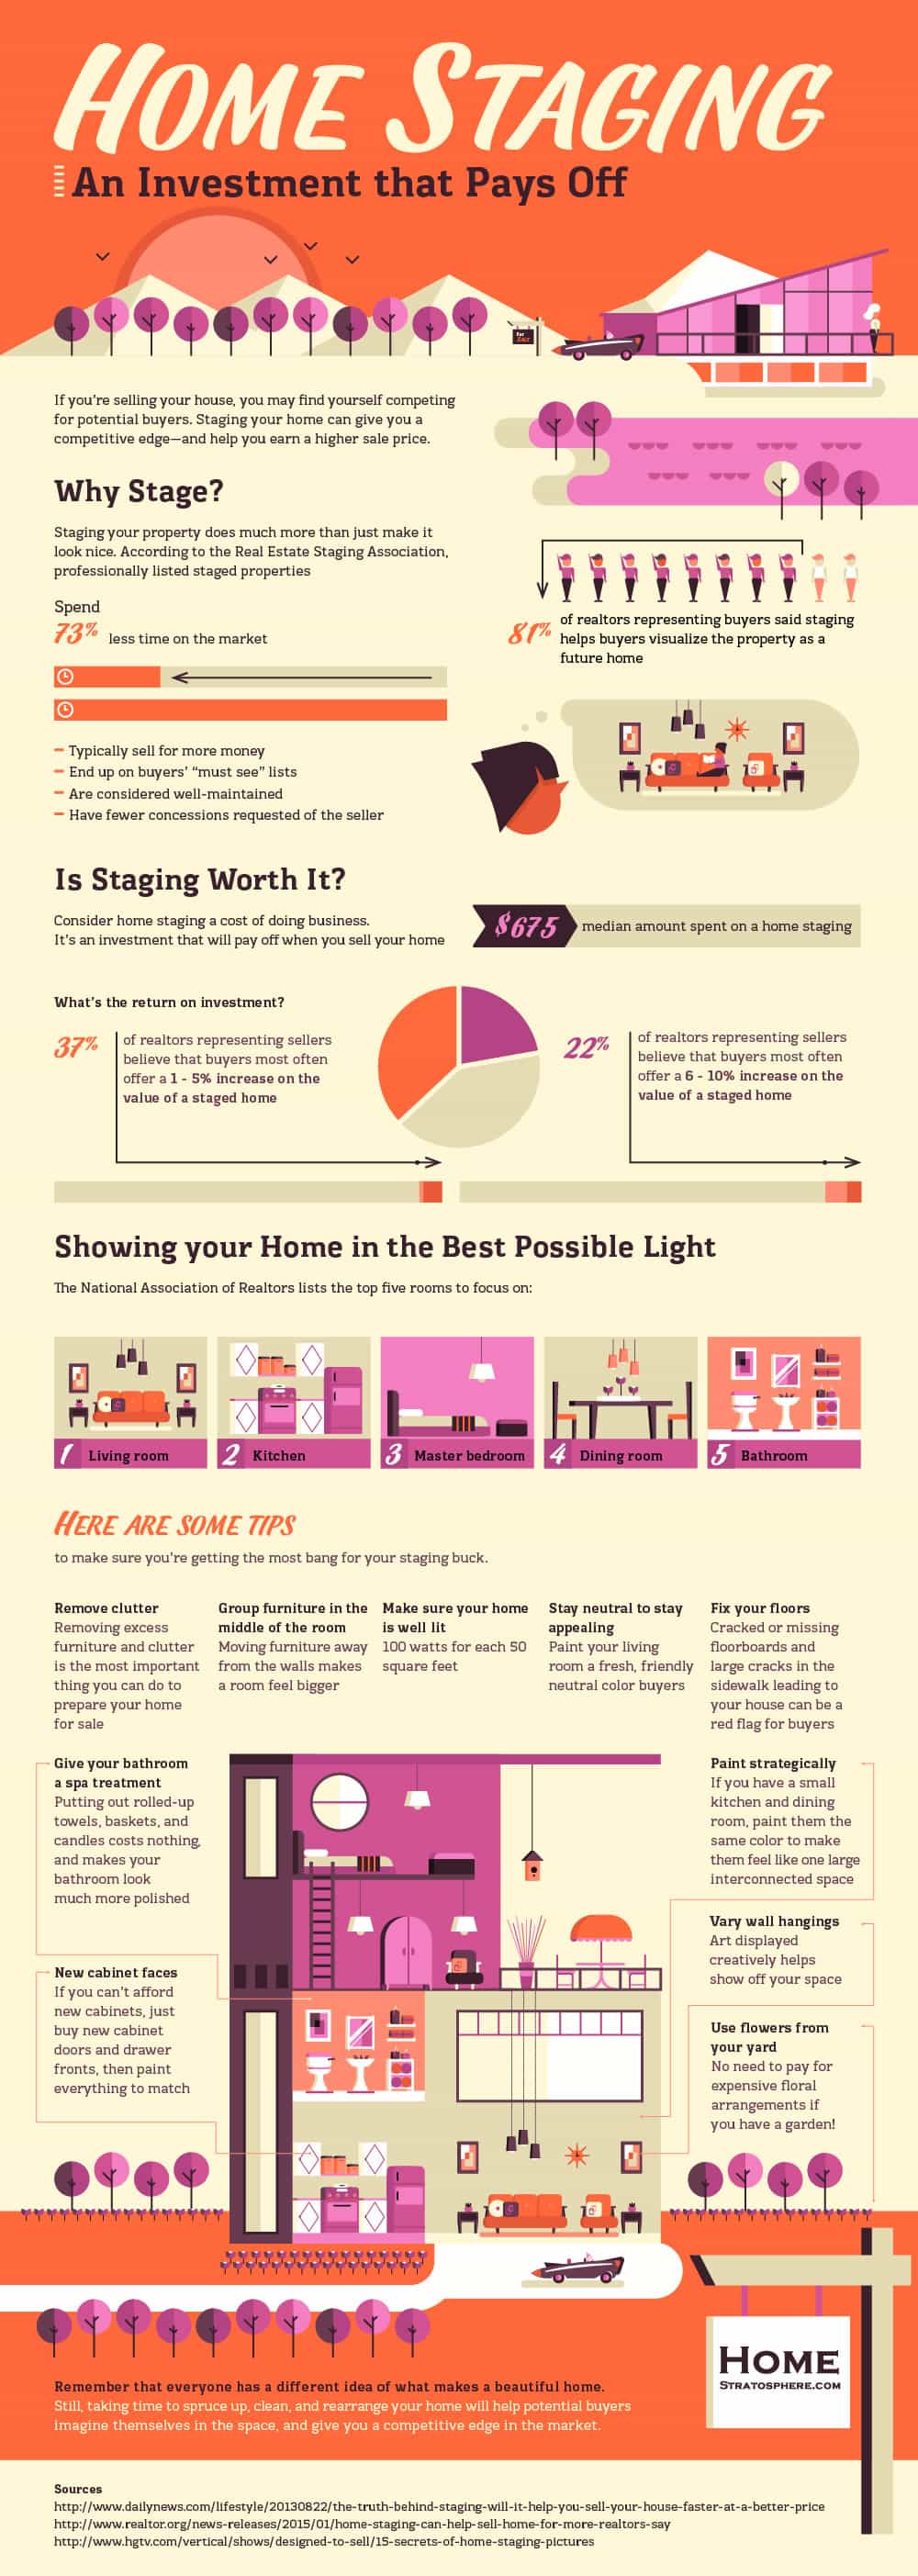 home staging tips and ideas